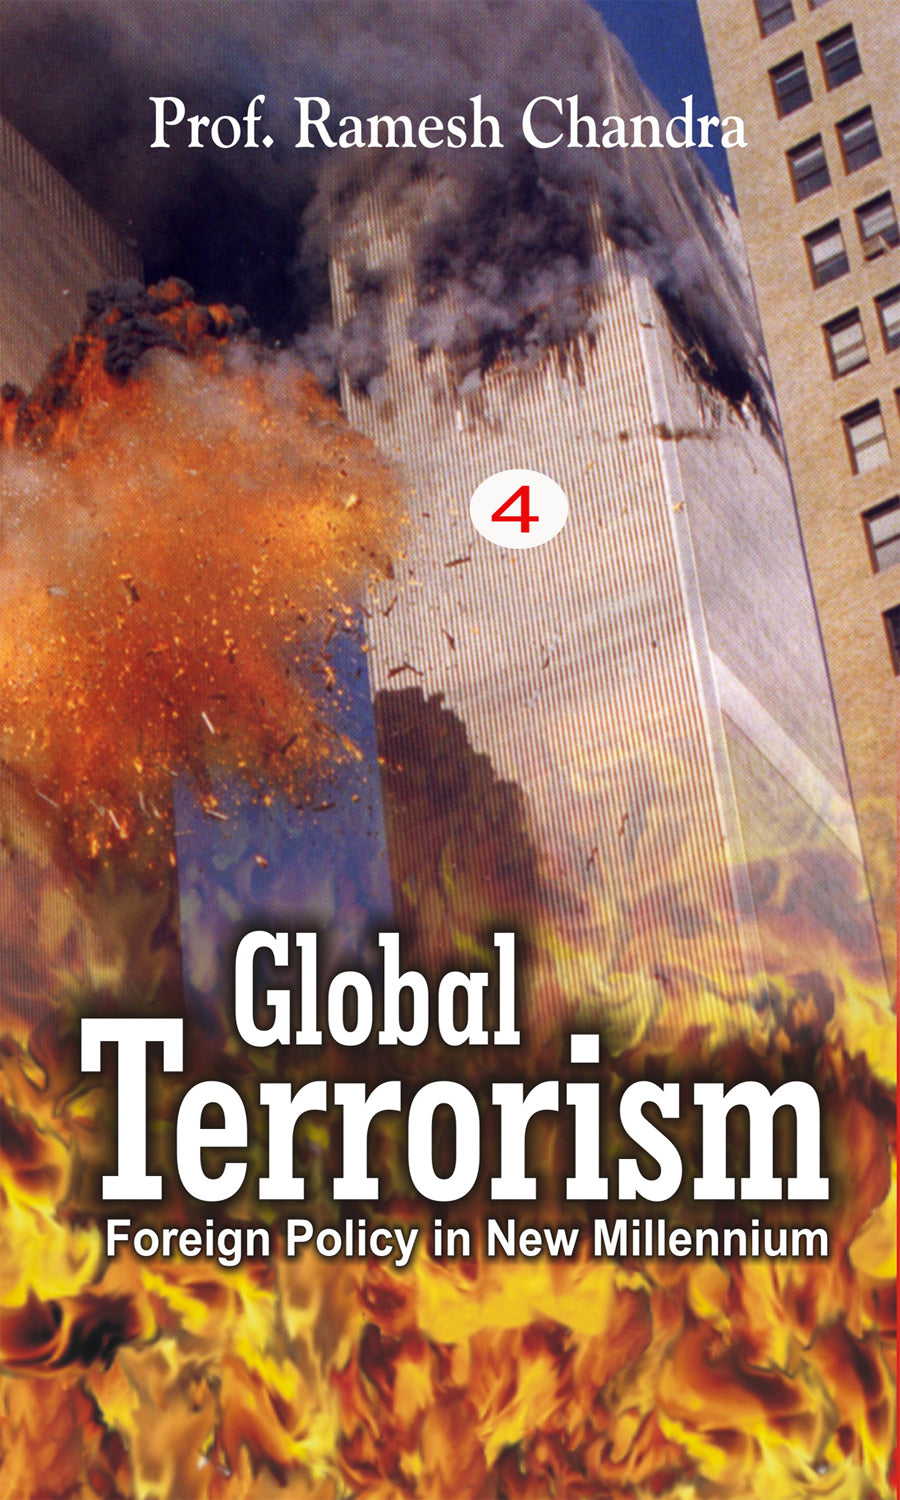 Global Terrorism: a Threat to Humanity(Terrorism in Europe and European Strategies) Volume Vol. 5th [Hardcover]